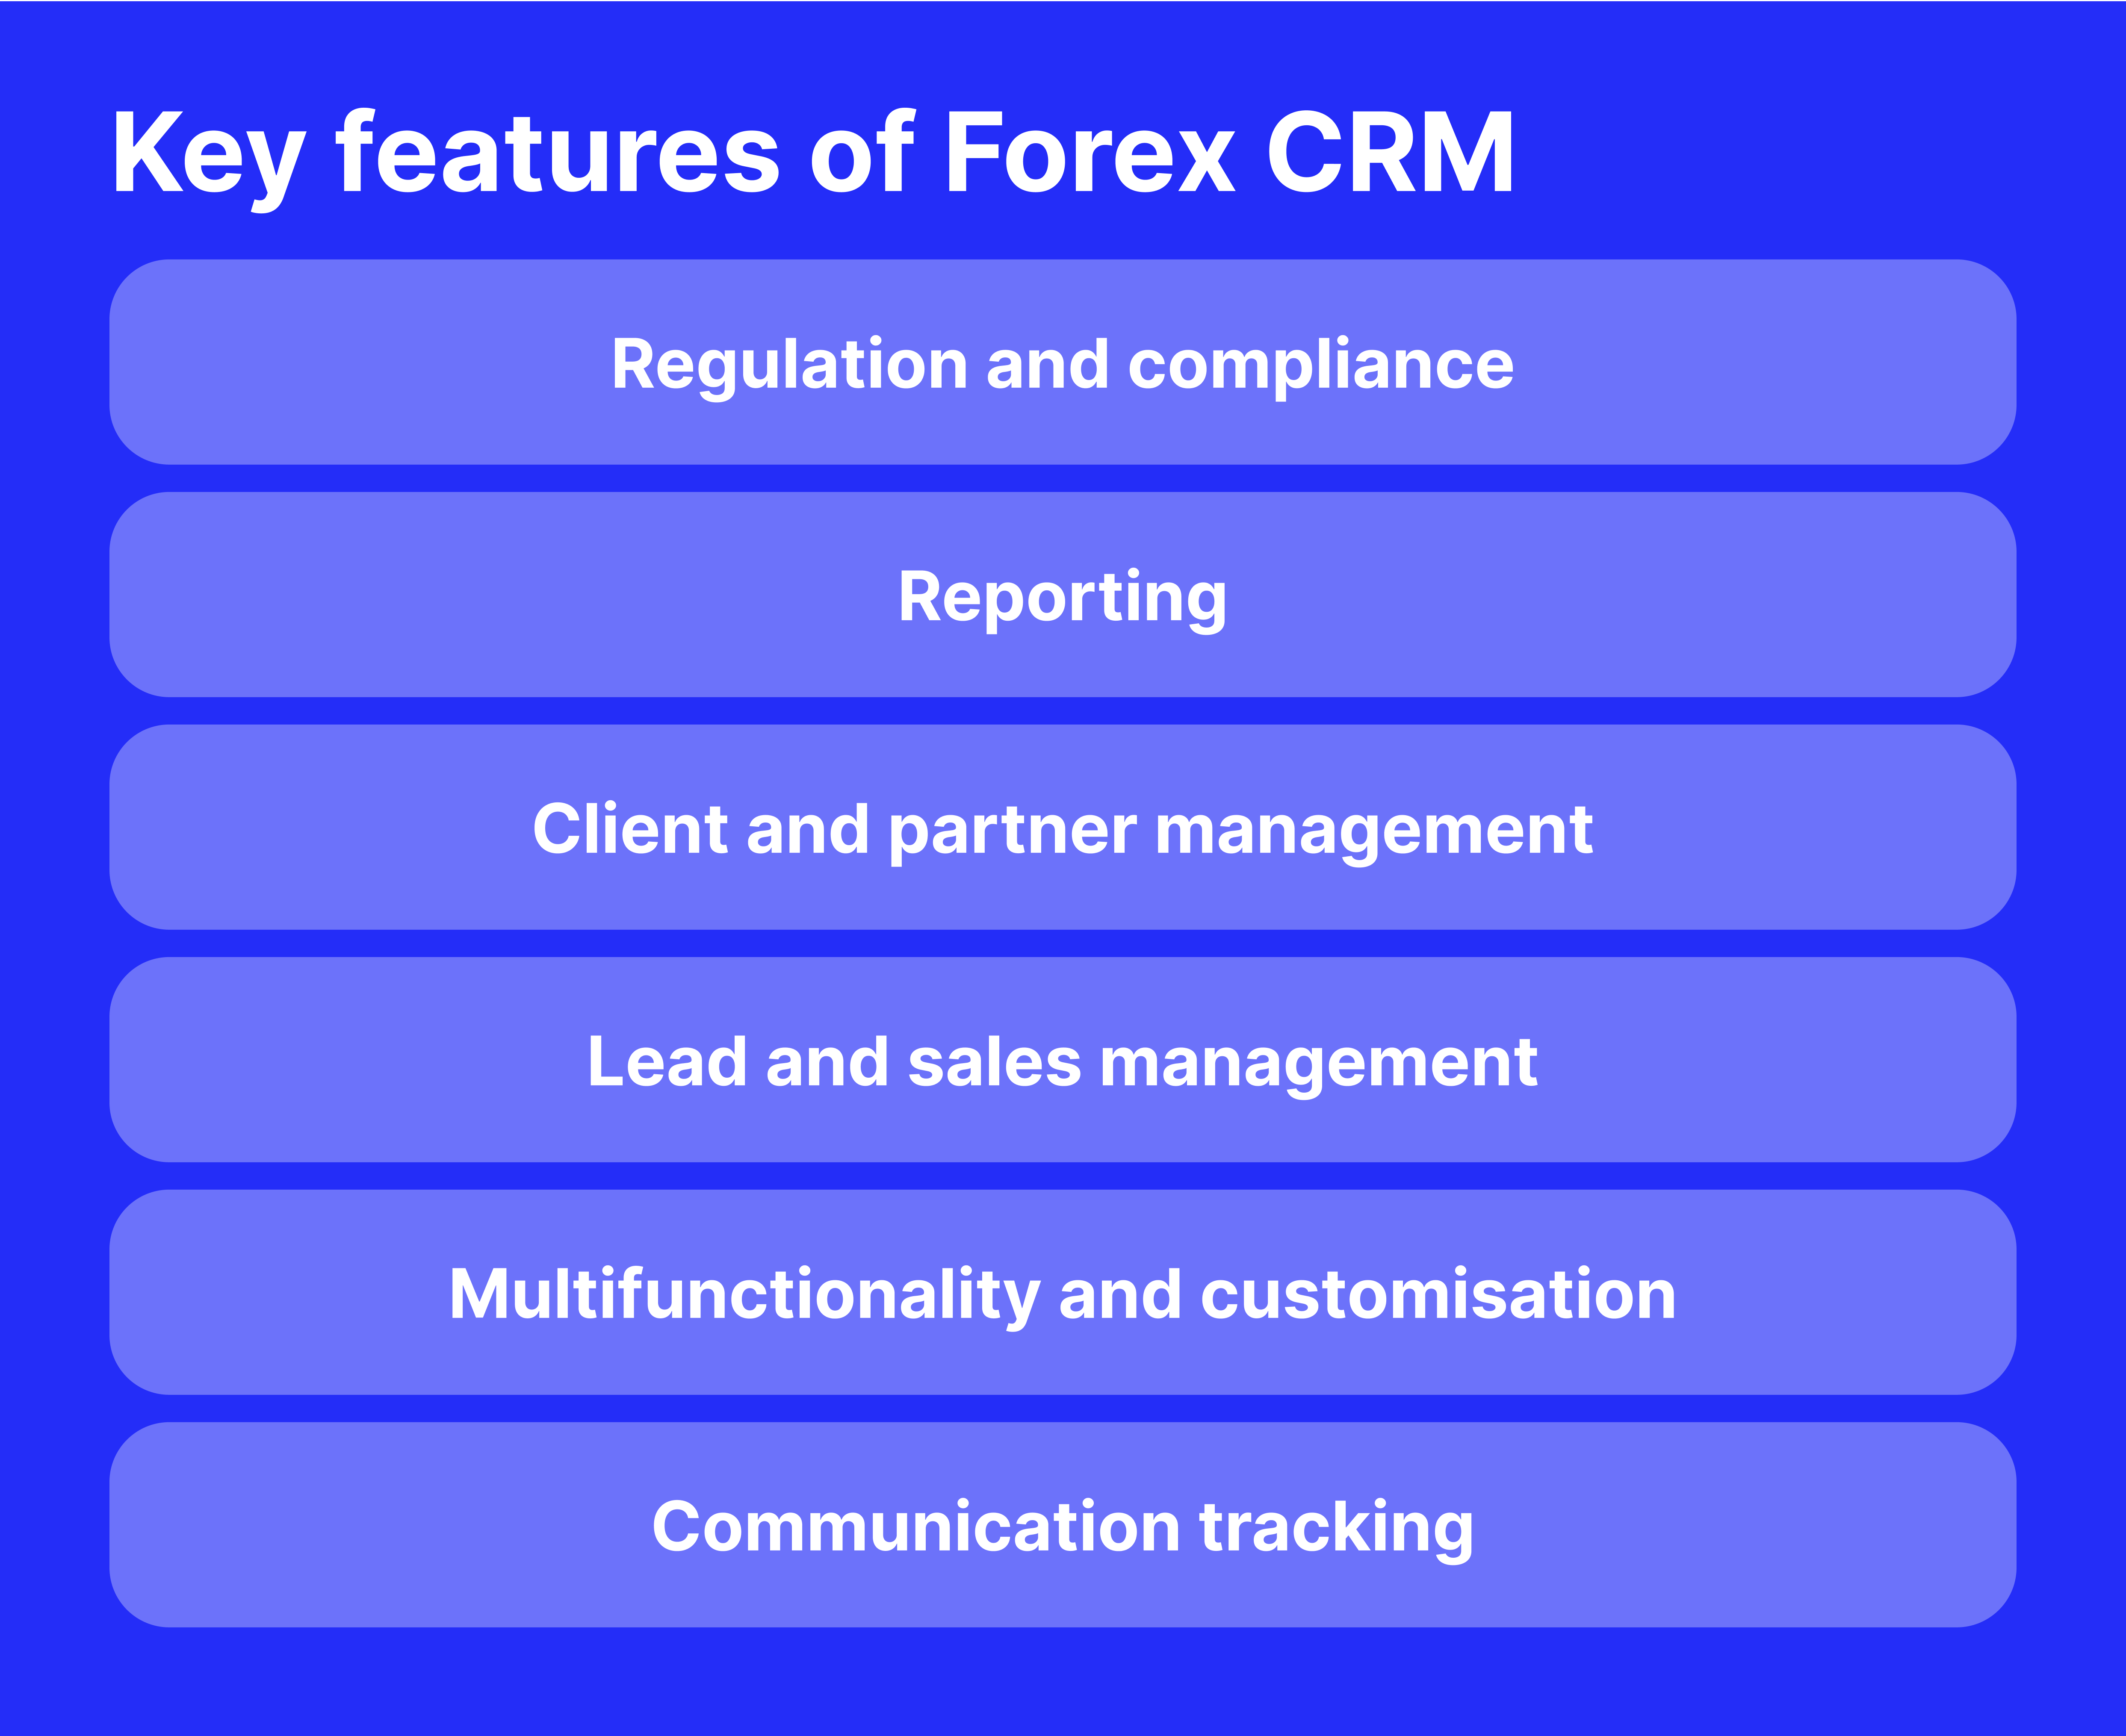 Key features of Forex CRM